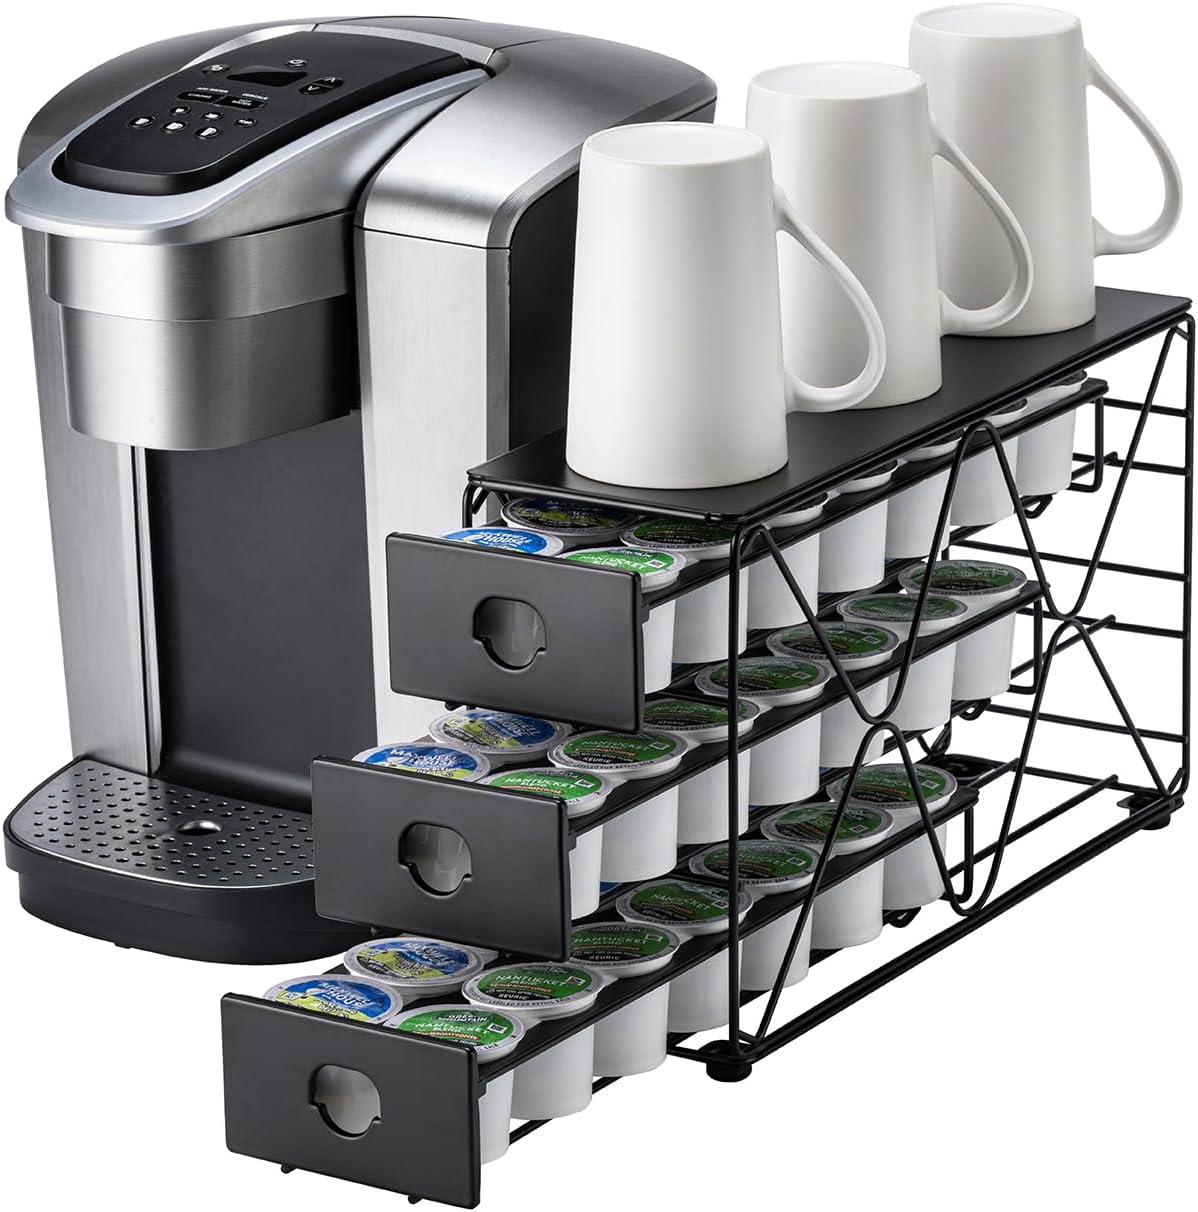 FlagShip K Cup Holder 3 Tier Coffee Pod Holder for K Cup Organizer Save Space Countertop Kitchen (42 Pods Capacity)